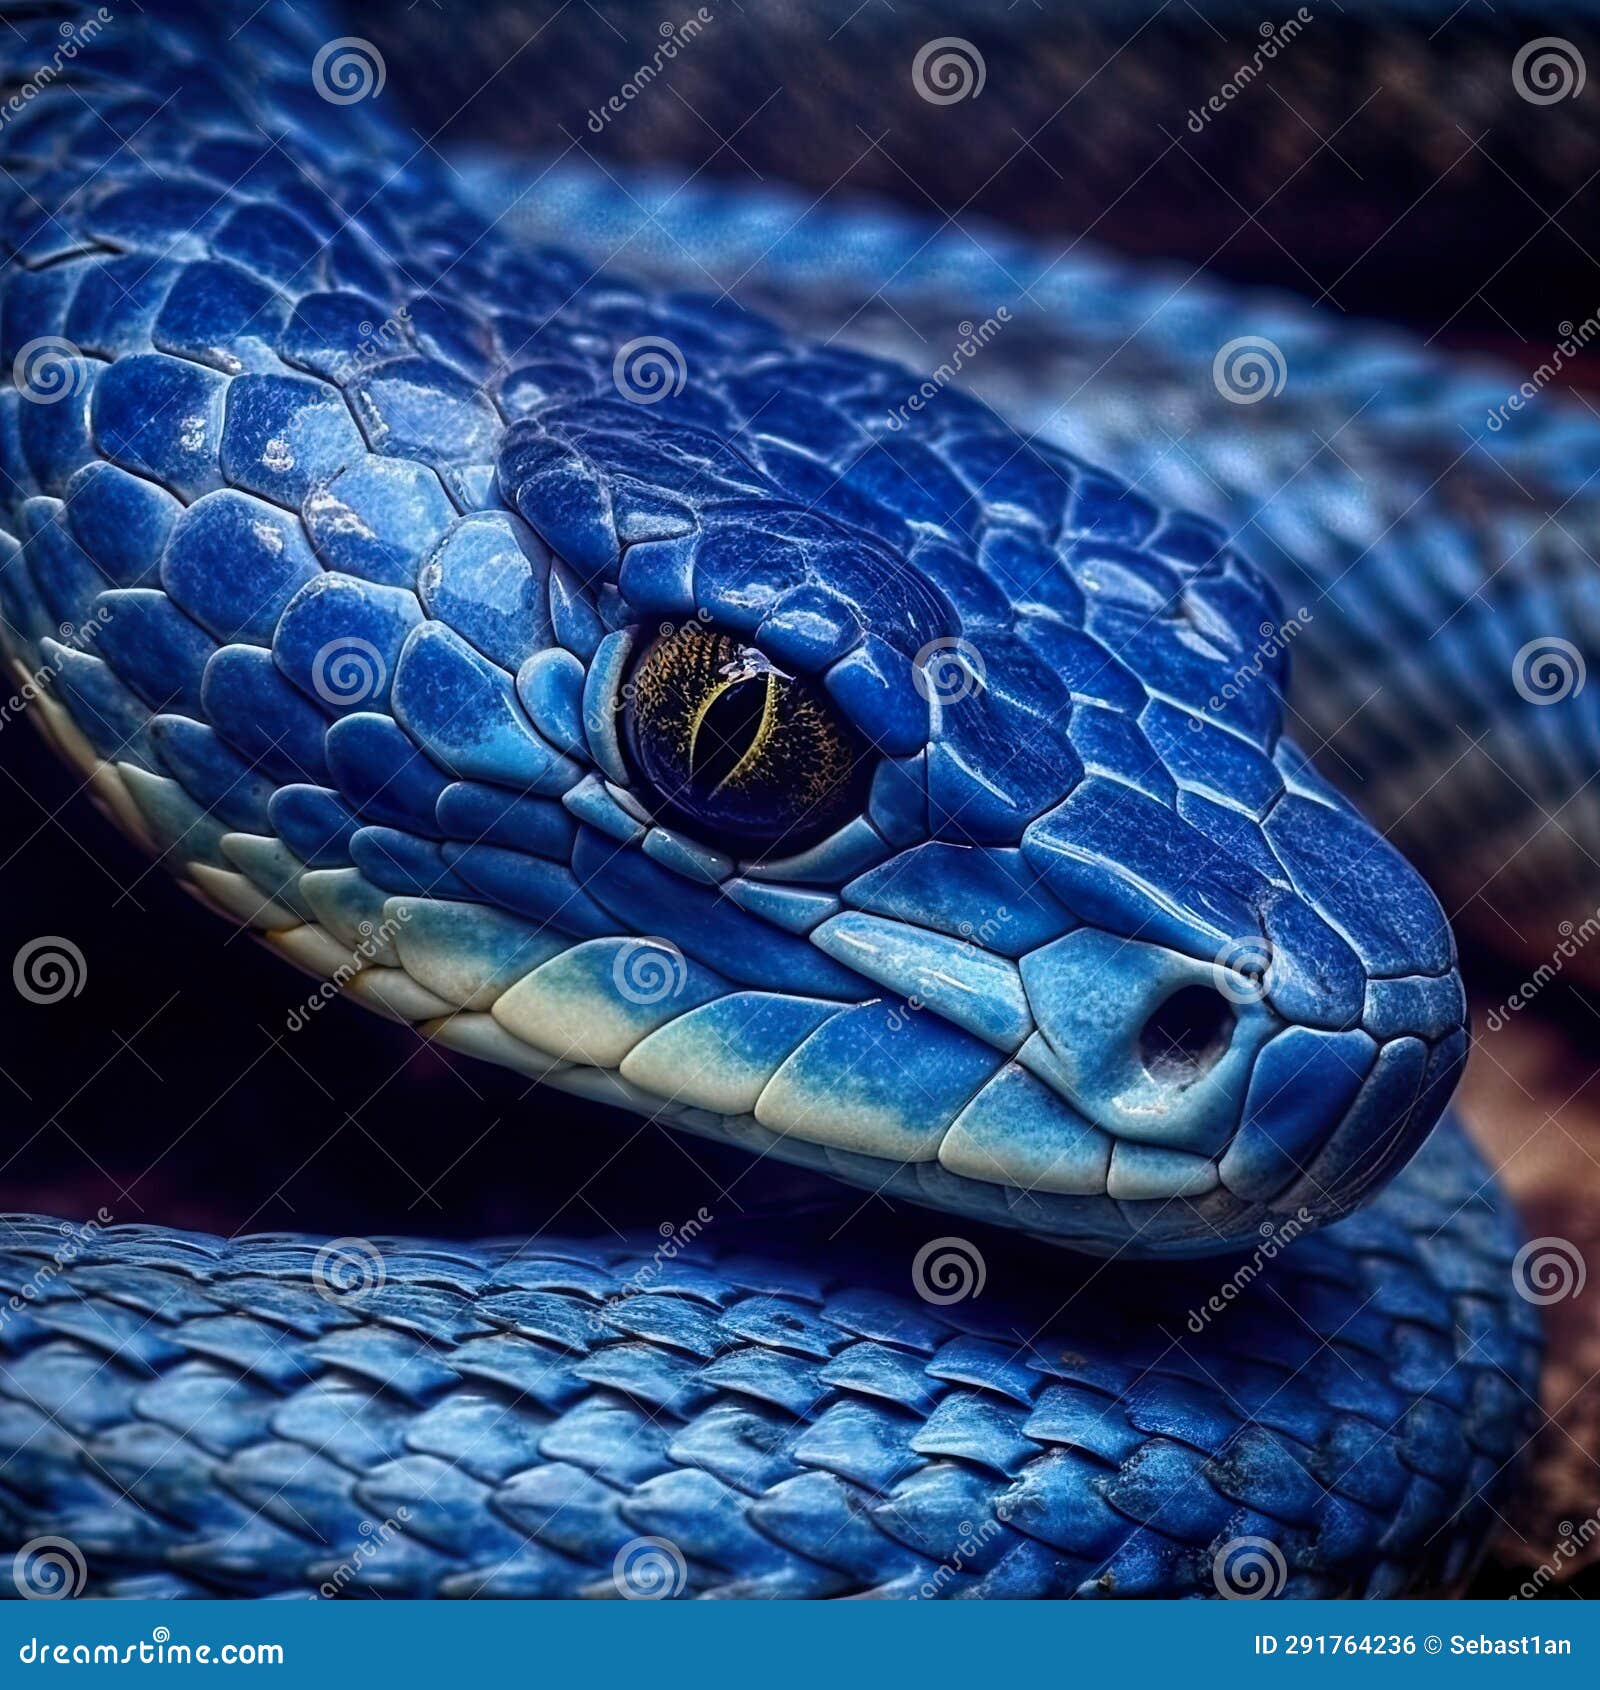 snake, offering an up-close view of this fascinating reptile.